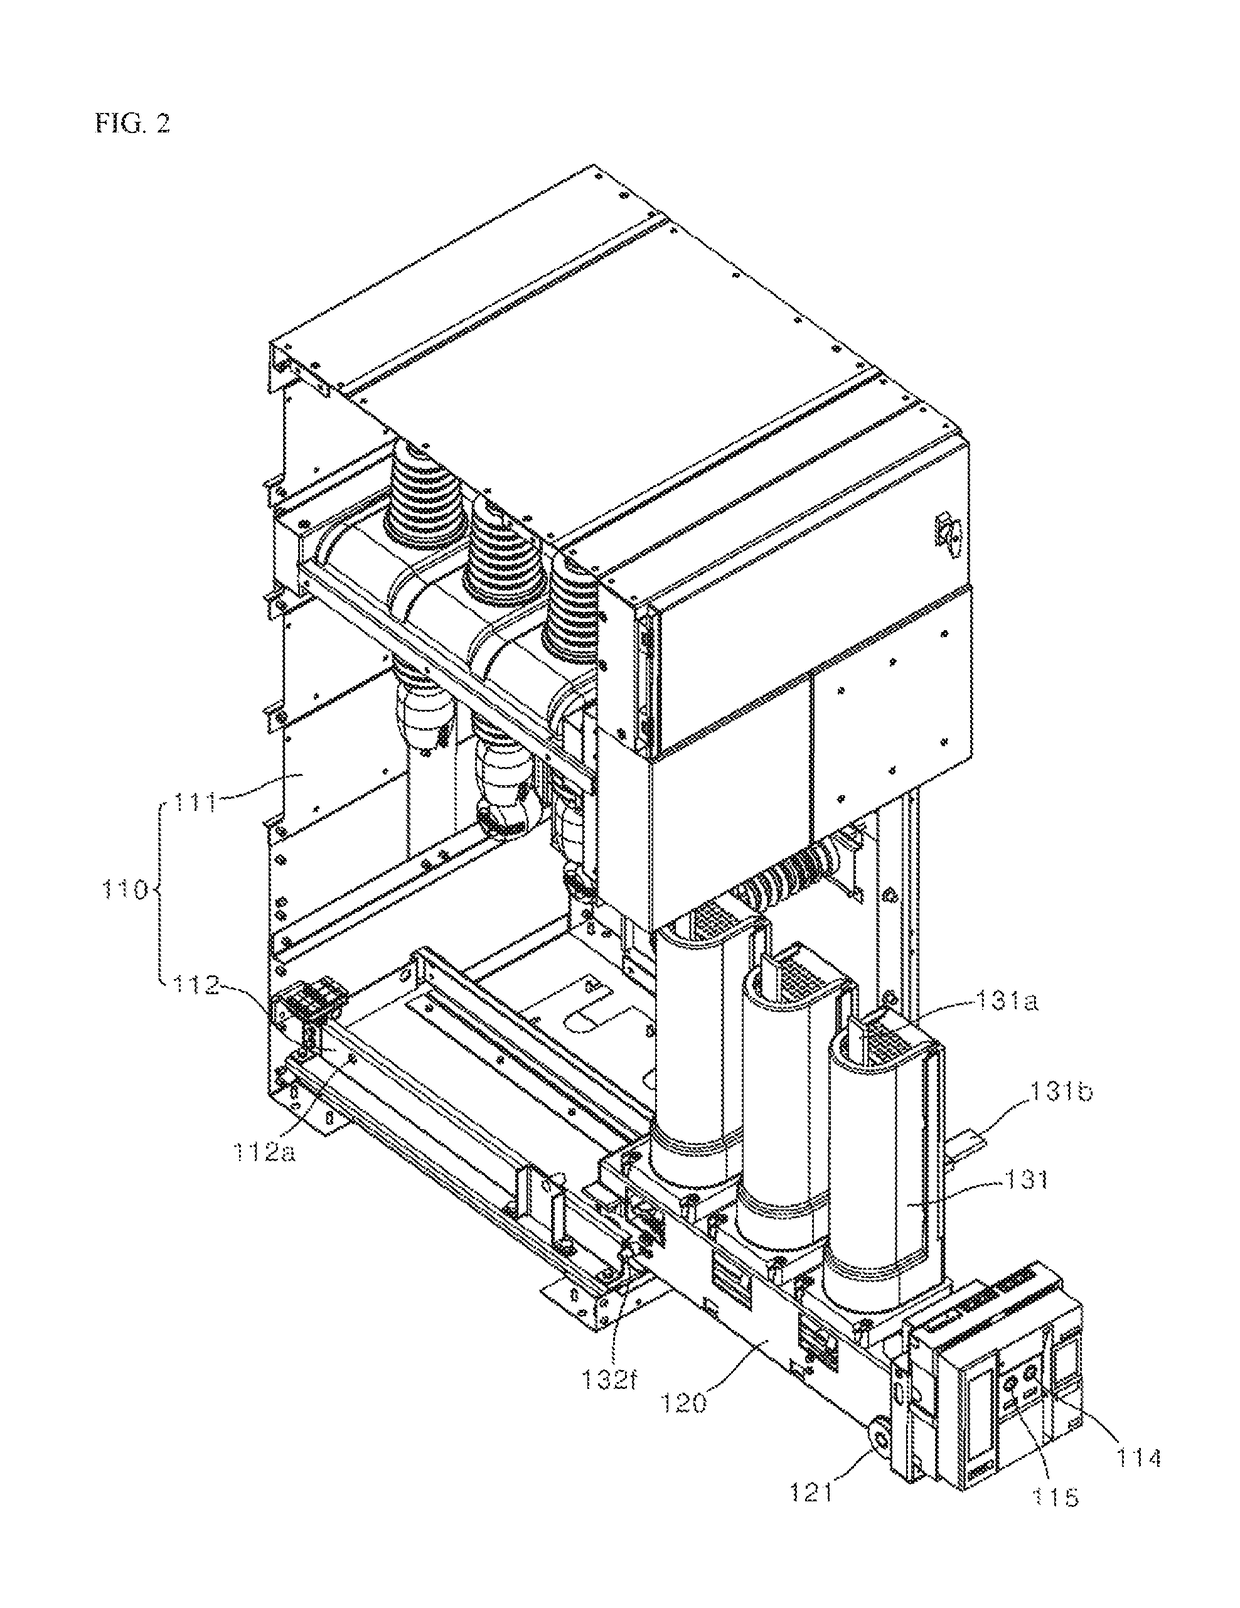 Interlock device for preventing close during insertion or withdraw on circuit breaker in switch board